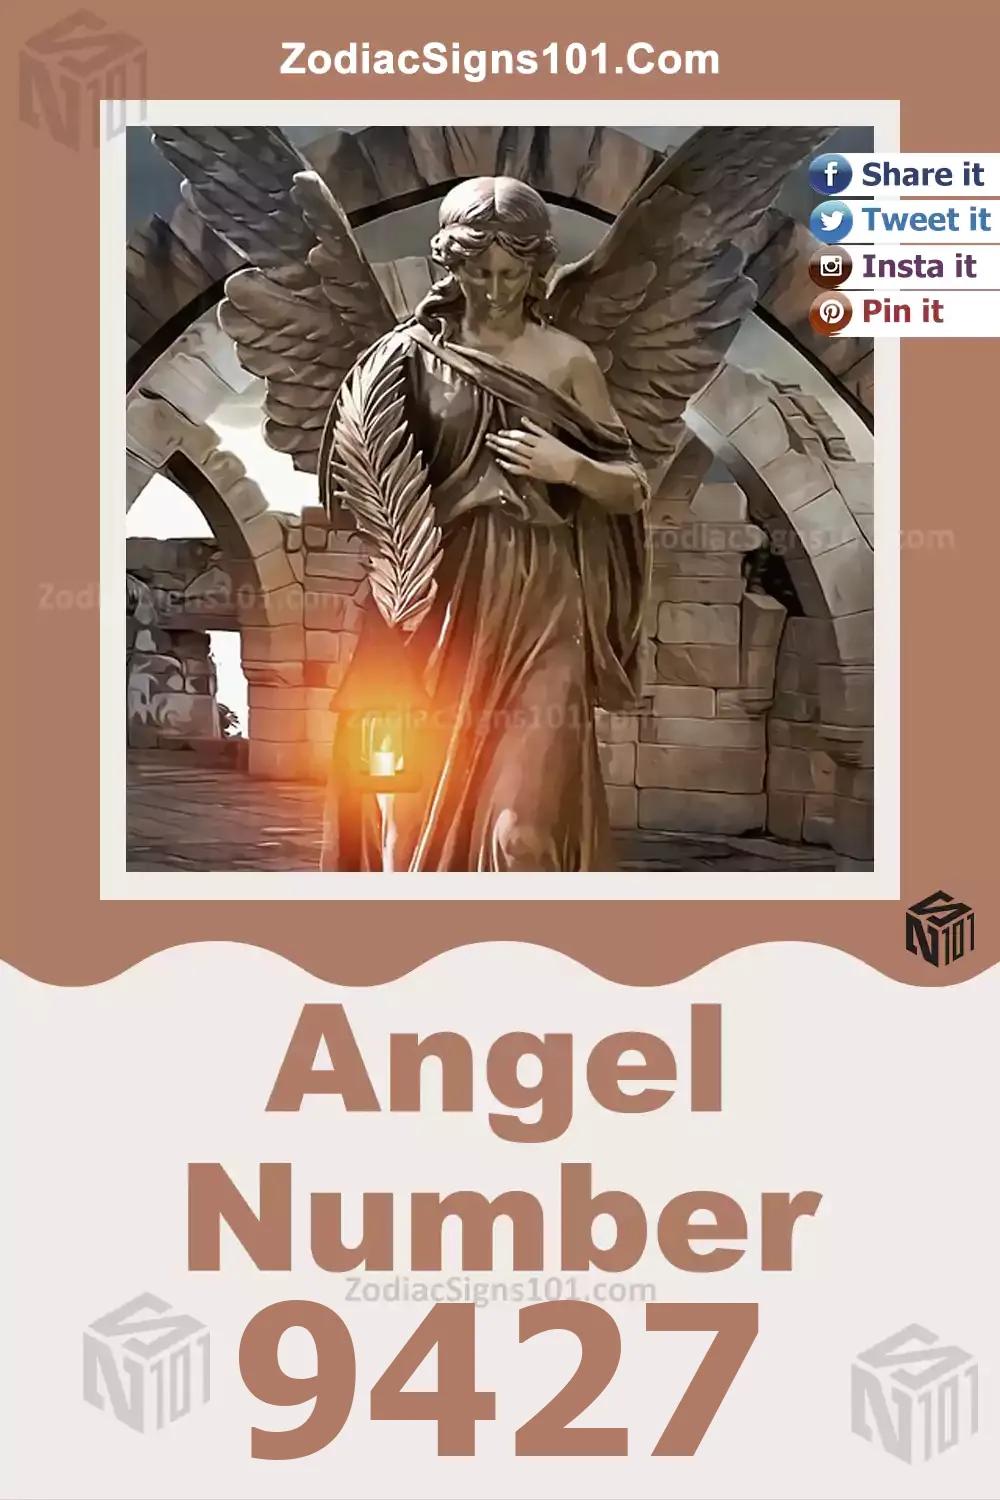 9427 Angel Number Meaning